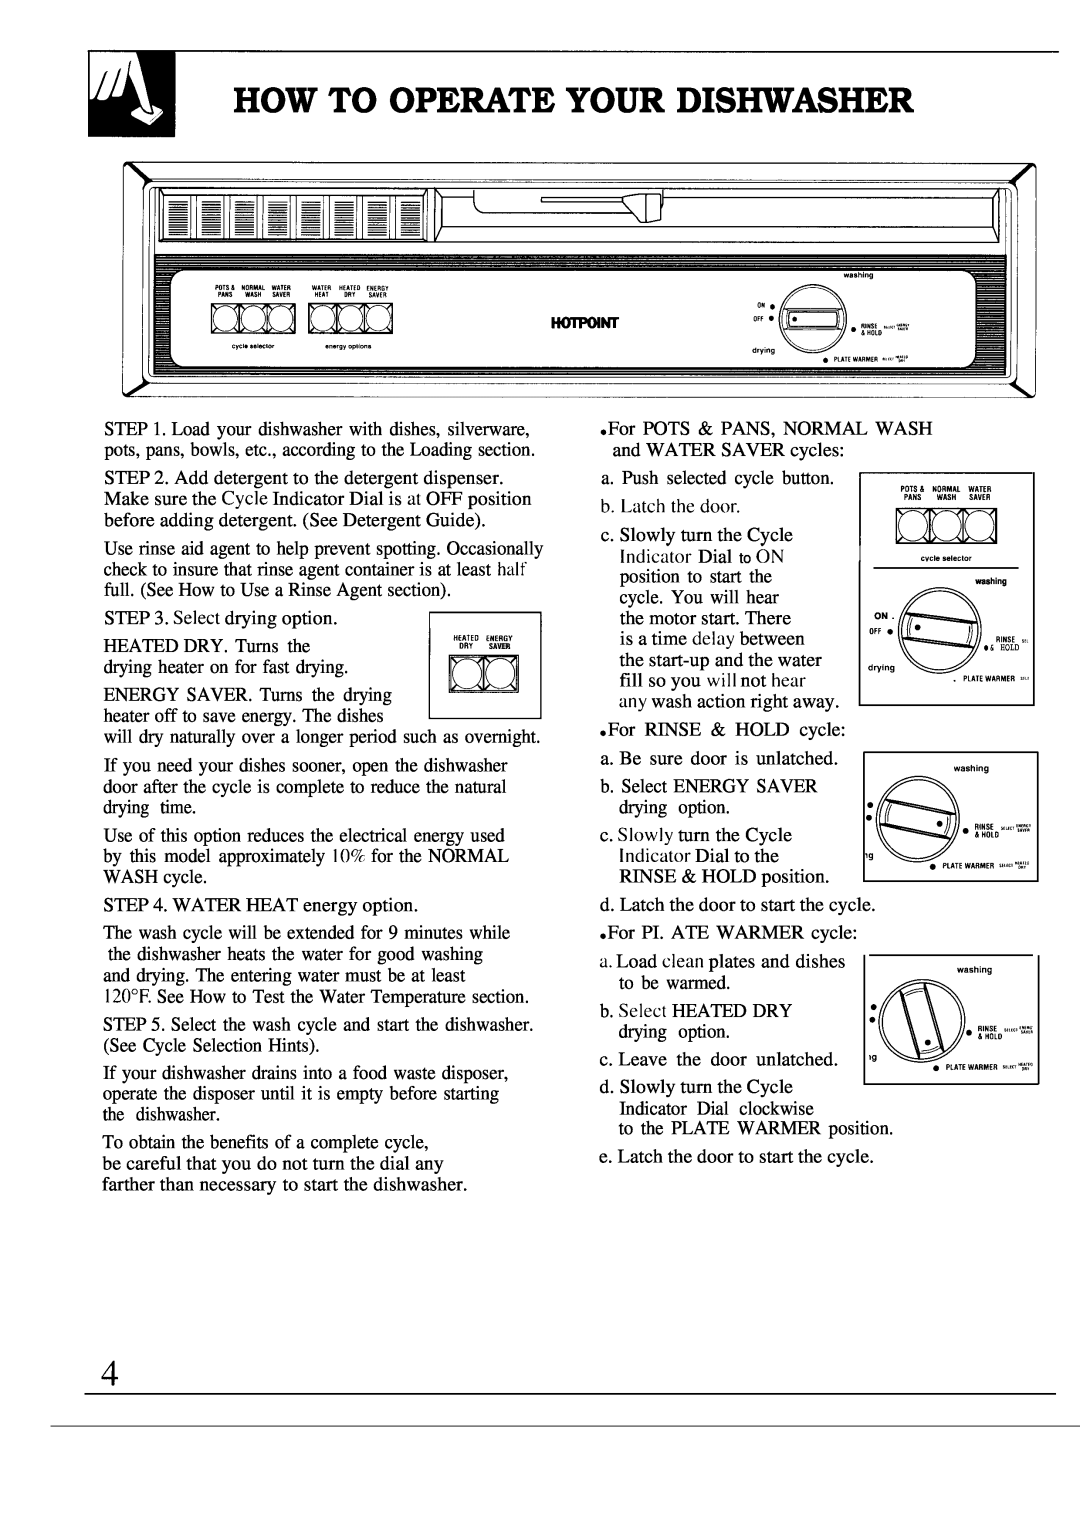 Hotpoint HDA6009 warranty How To Operate Your Dishwasher, bLatchthedo’r 